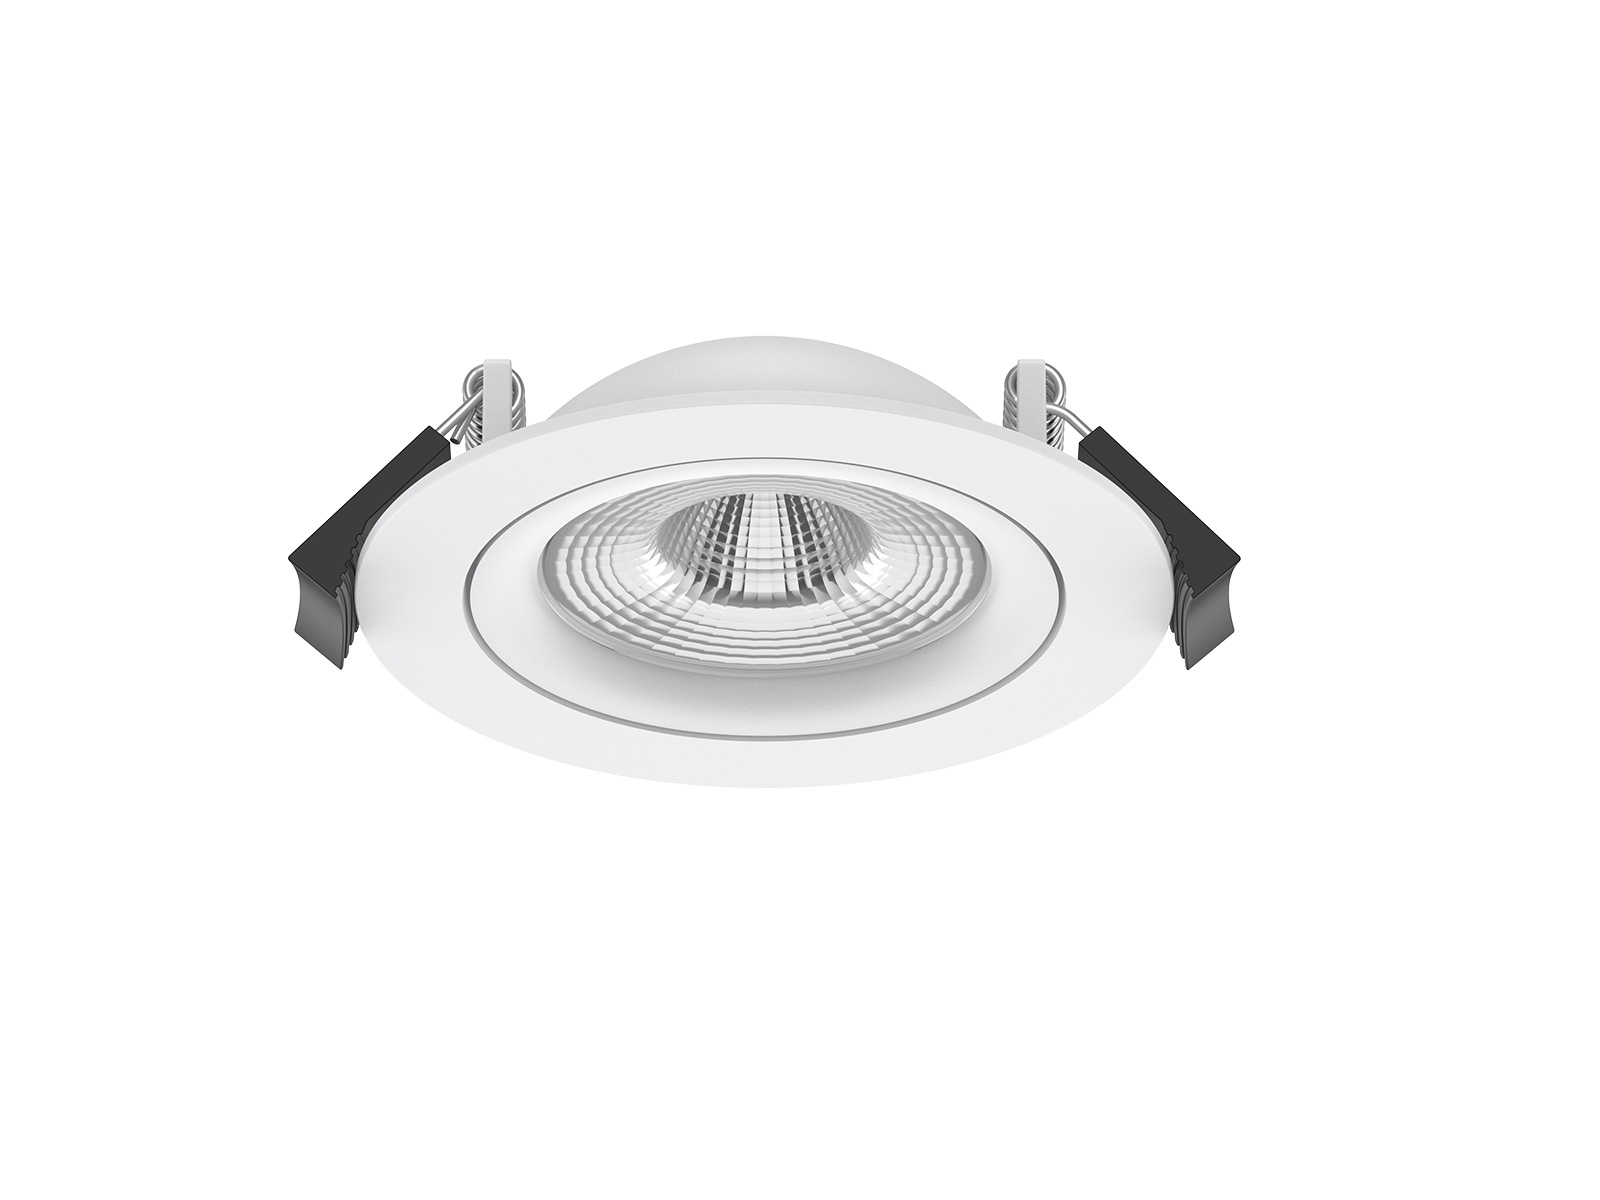 CL164 LED downlight